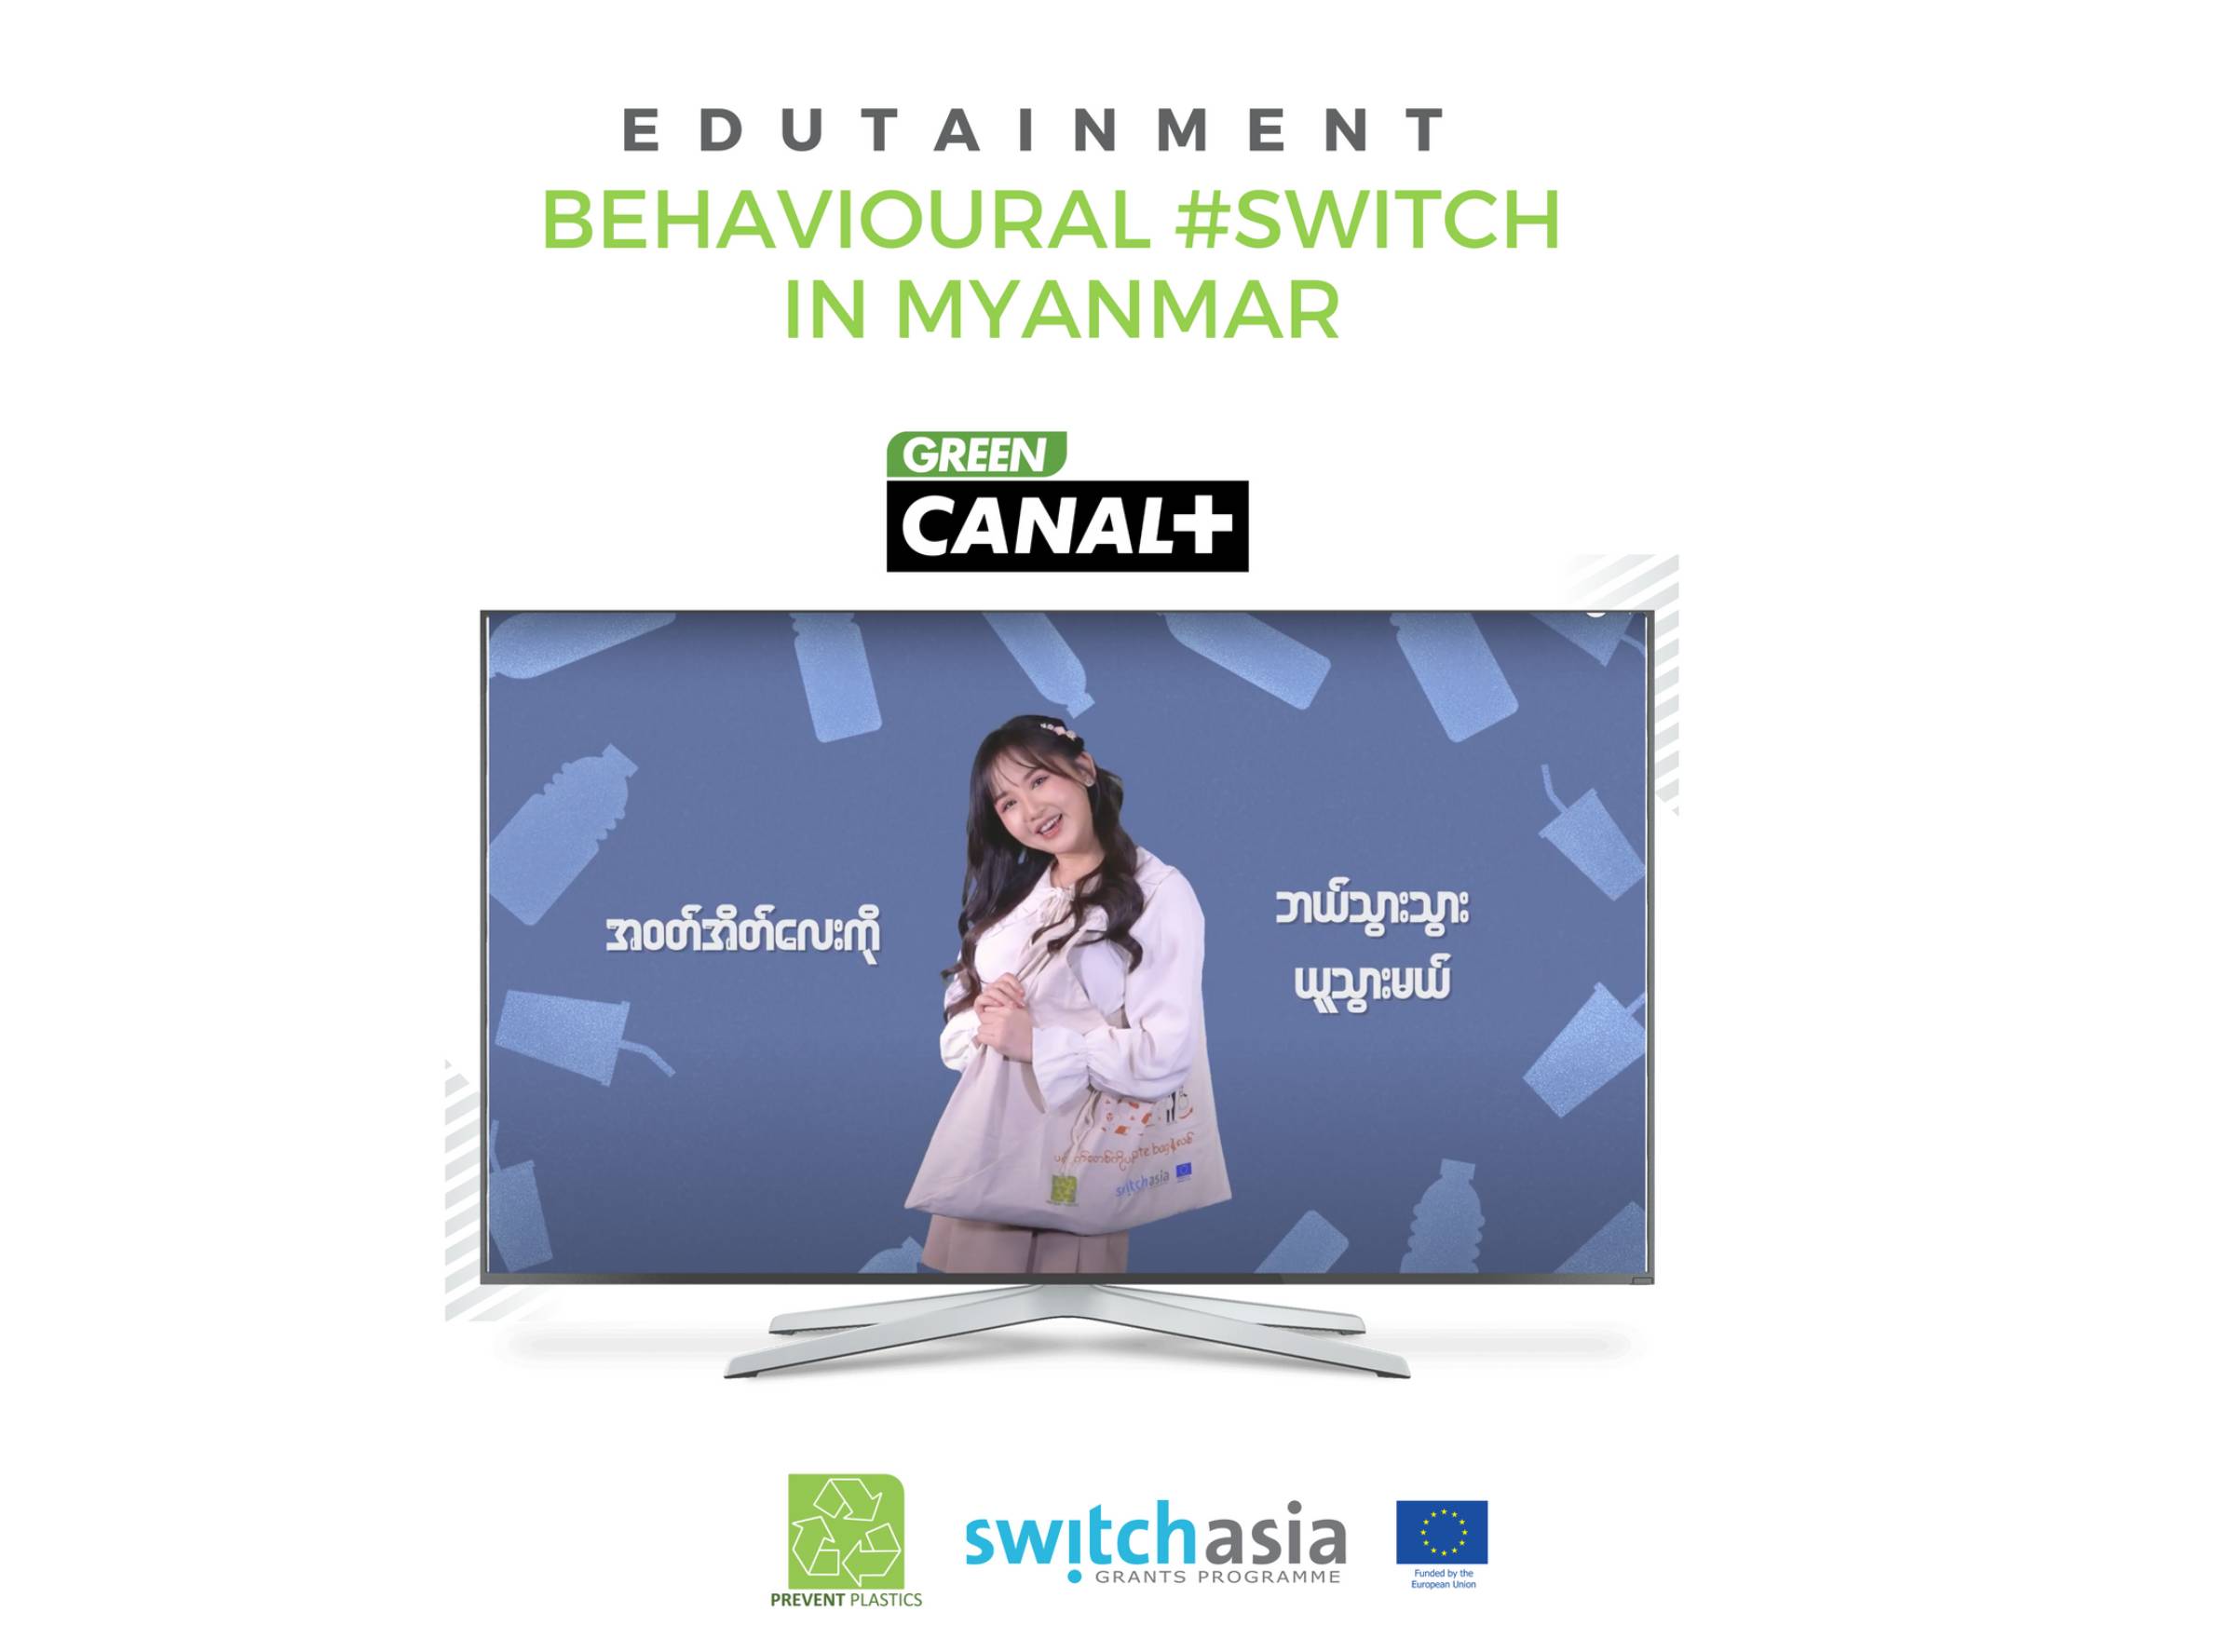 Eco-literacy education to gain momentum in Myanmar as Prevent Plastics and CANAL+ Myanmar launch first edutainment programme